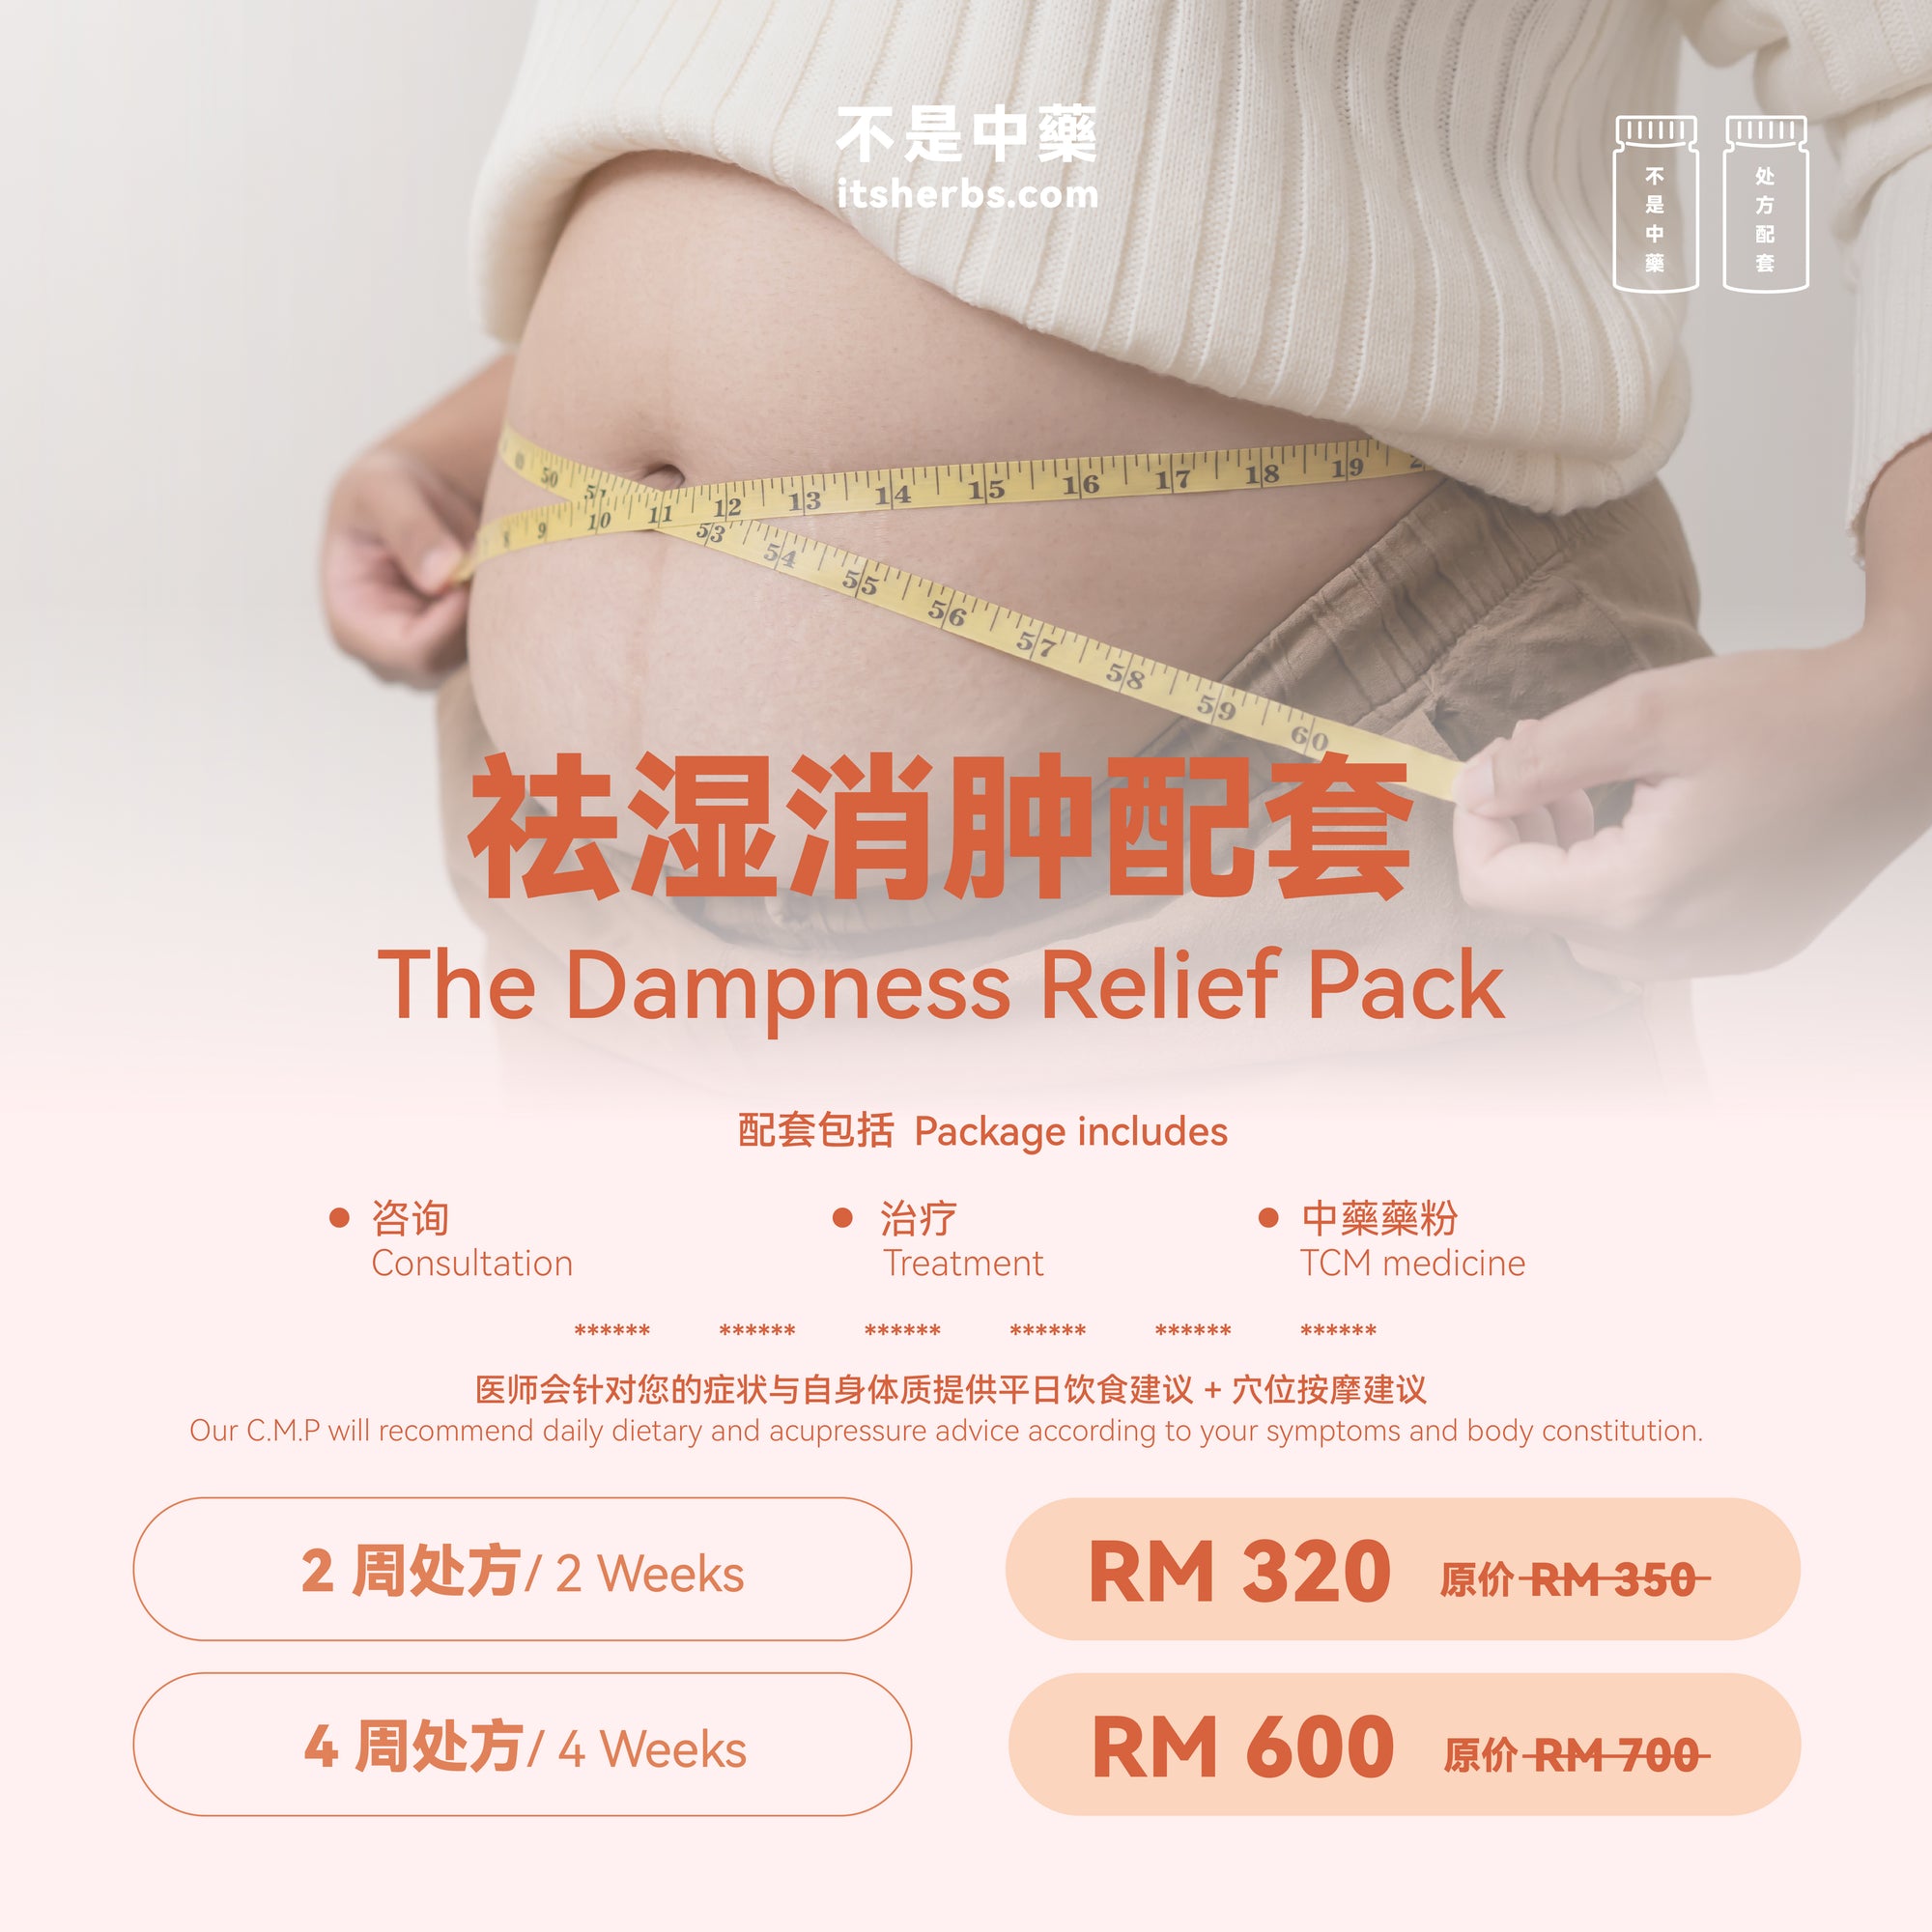 The Dampness Relief Pack